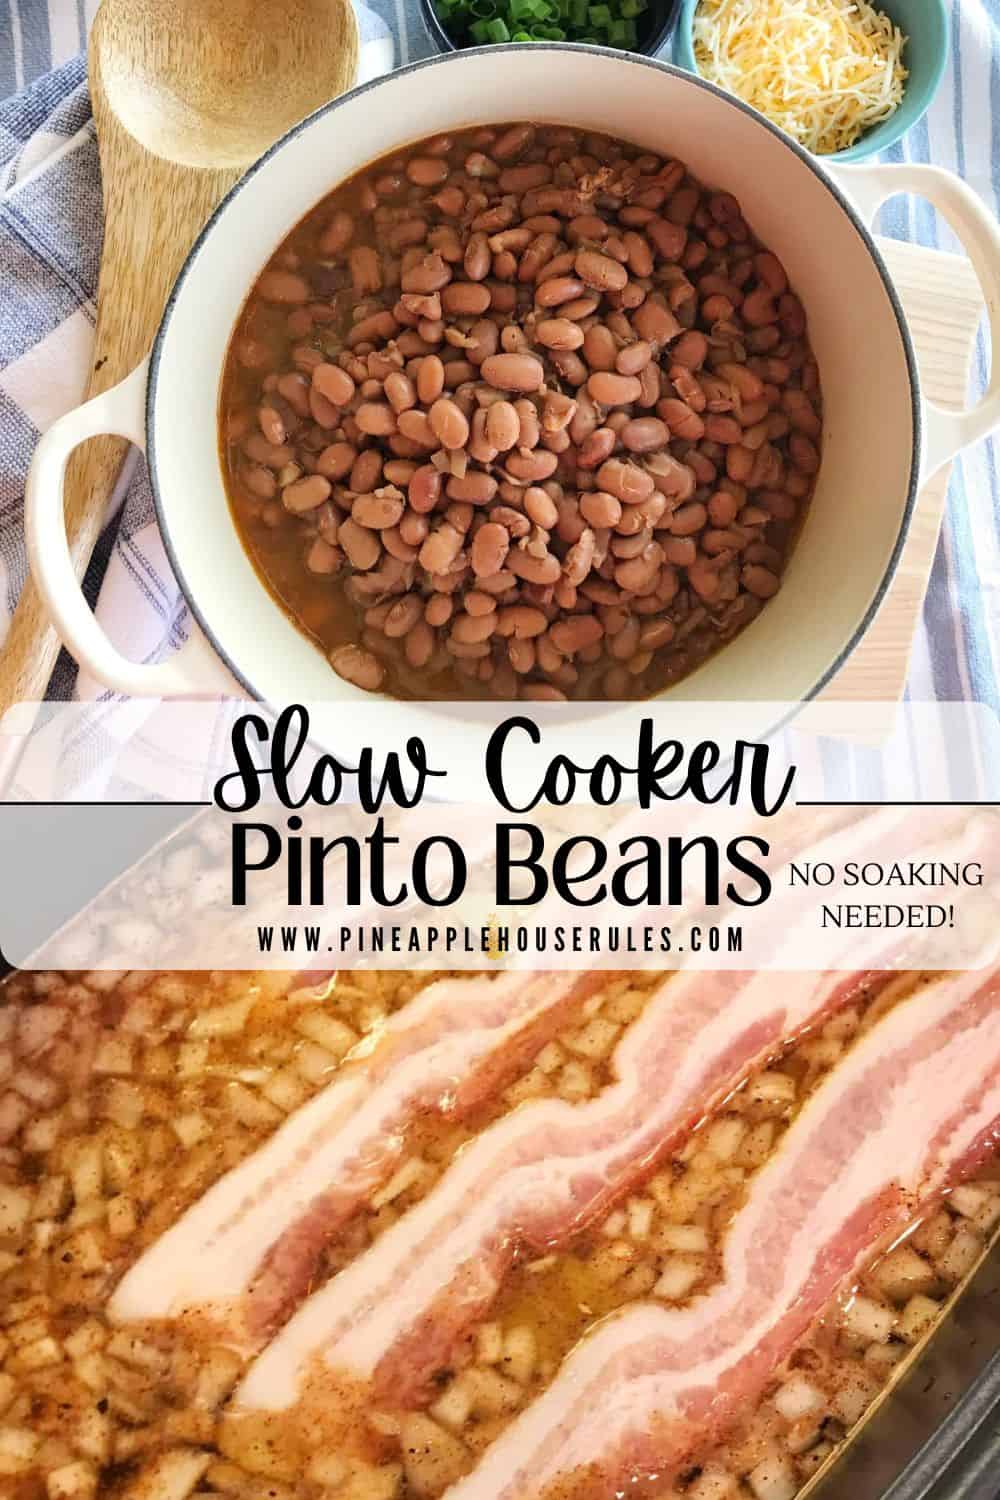 These Slow Cooker Pinto Beans are an easy dump and go recipe that doesn't involve soaking the beans ahead of time. It makes for a great Crock Pot Side Dish! Slow Cooker Pinto Beans | Pinto Beans | Pinto Beans in the Crock Pot | Pinto Beans Recipe | Pinto Beans Crockpot | Slow Cooker Pinto Beans with Bacon | Slow Cooker Pinto Beans No Soak | Slow Cooker Side Dishes | Slow Cooker Sides for a Crowd | Crock Pot Side Dishes | Crock Pot Sides | Crock Pot Side Dishes for a Crowd | Crock Pot Side Dish